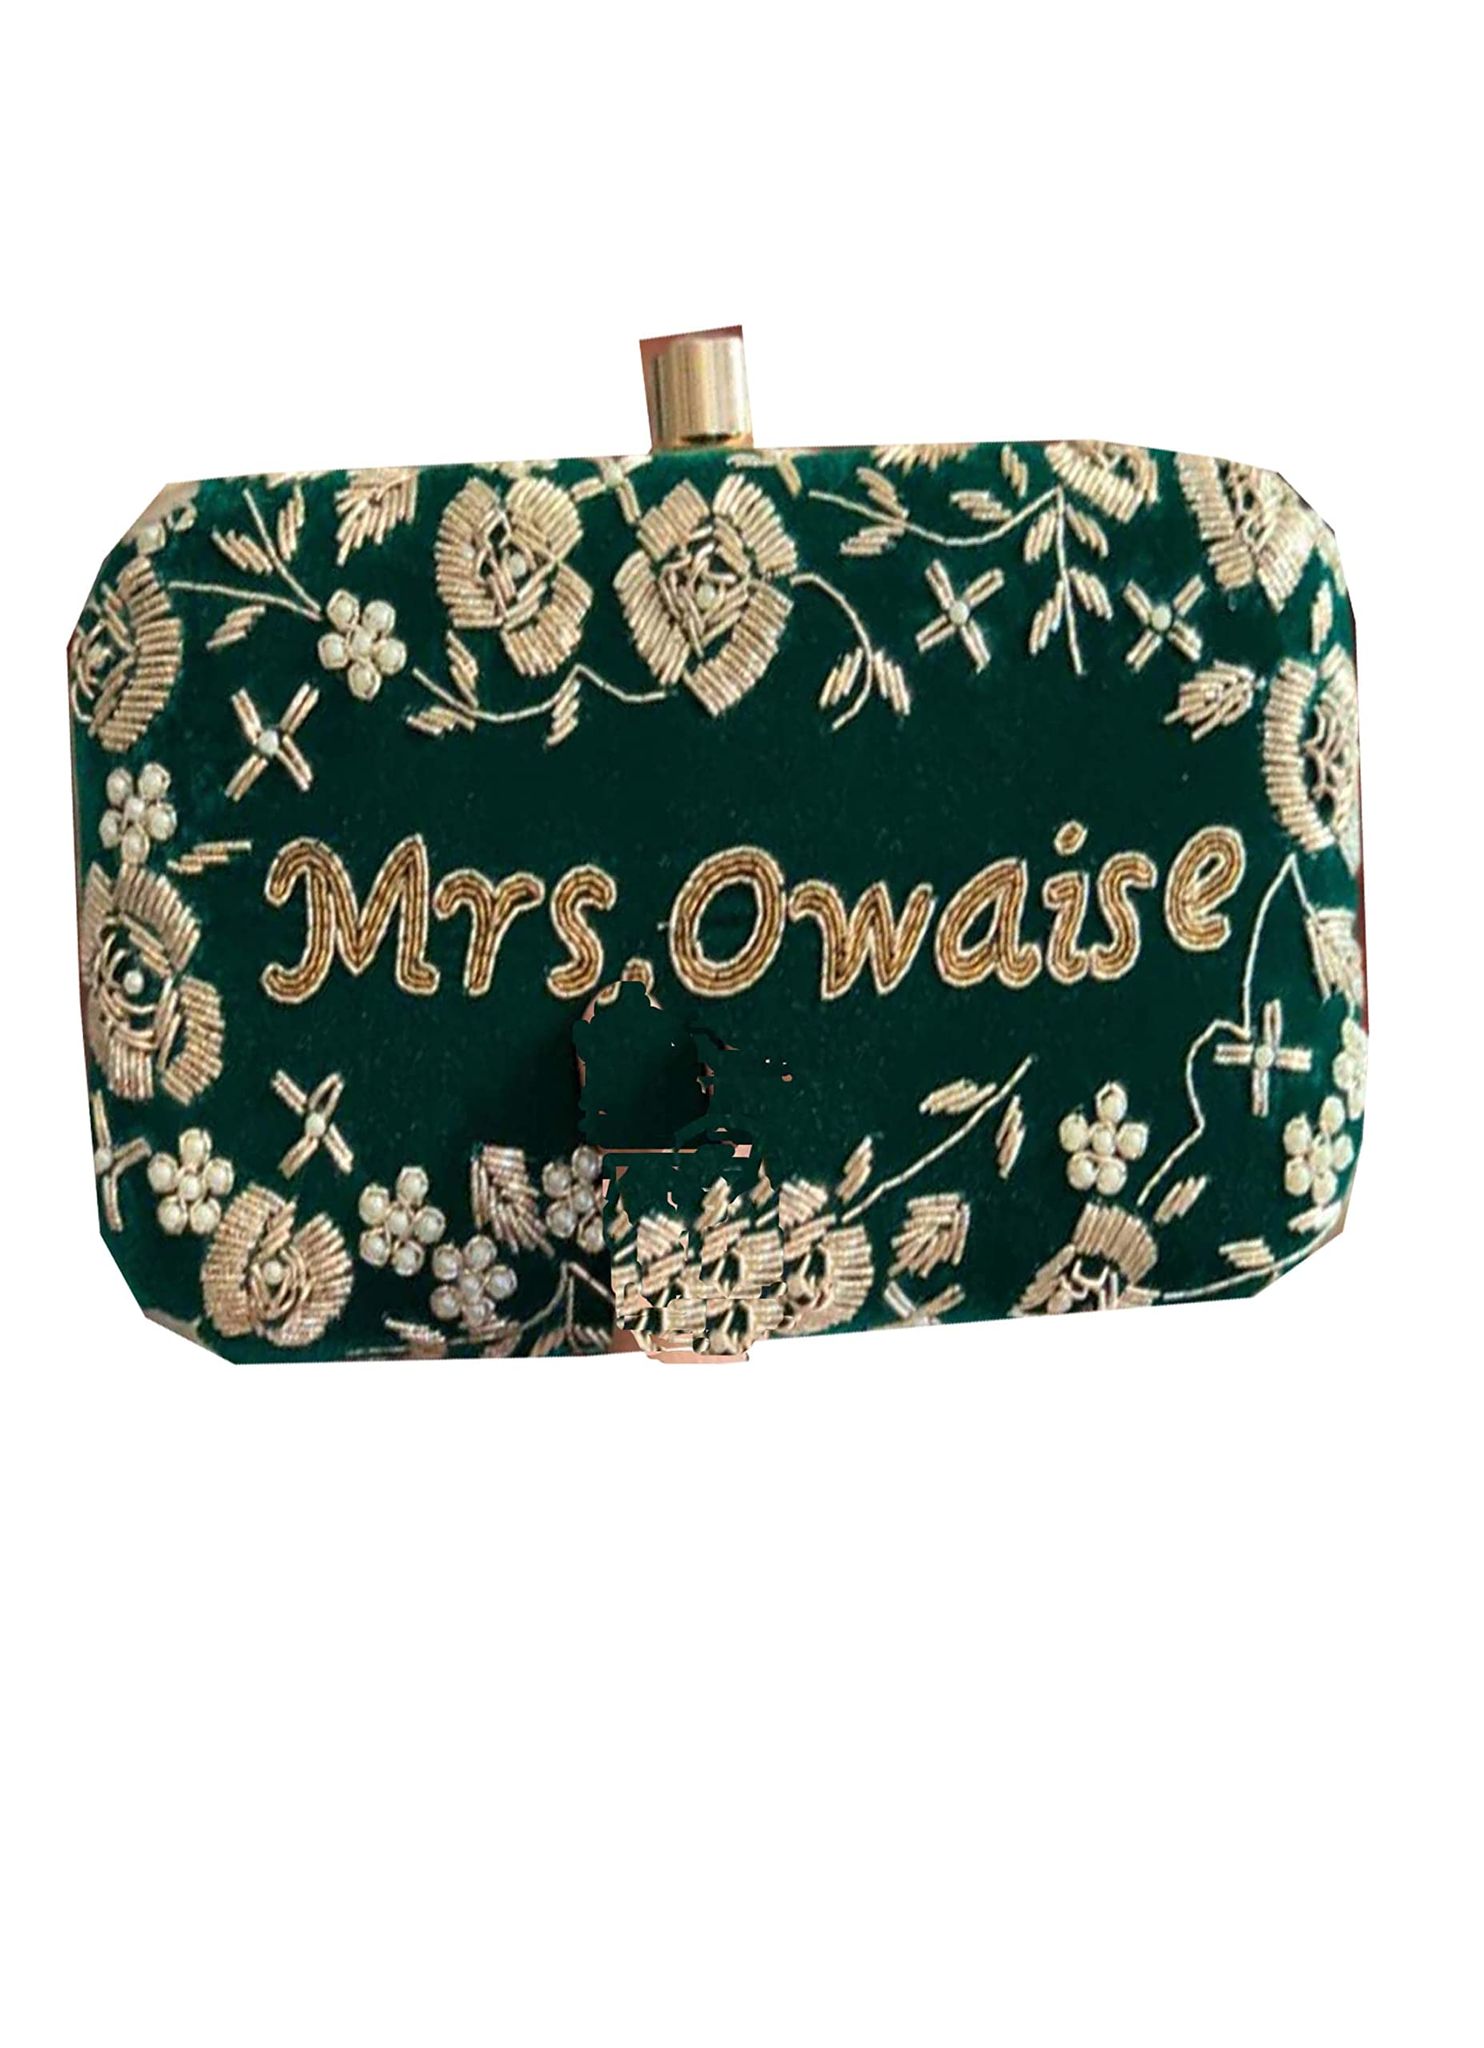 Personalized/Customized Hand Embroidery Green clutch with Customization/Personalization your name Double side work for women